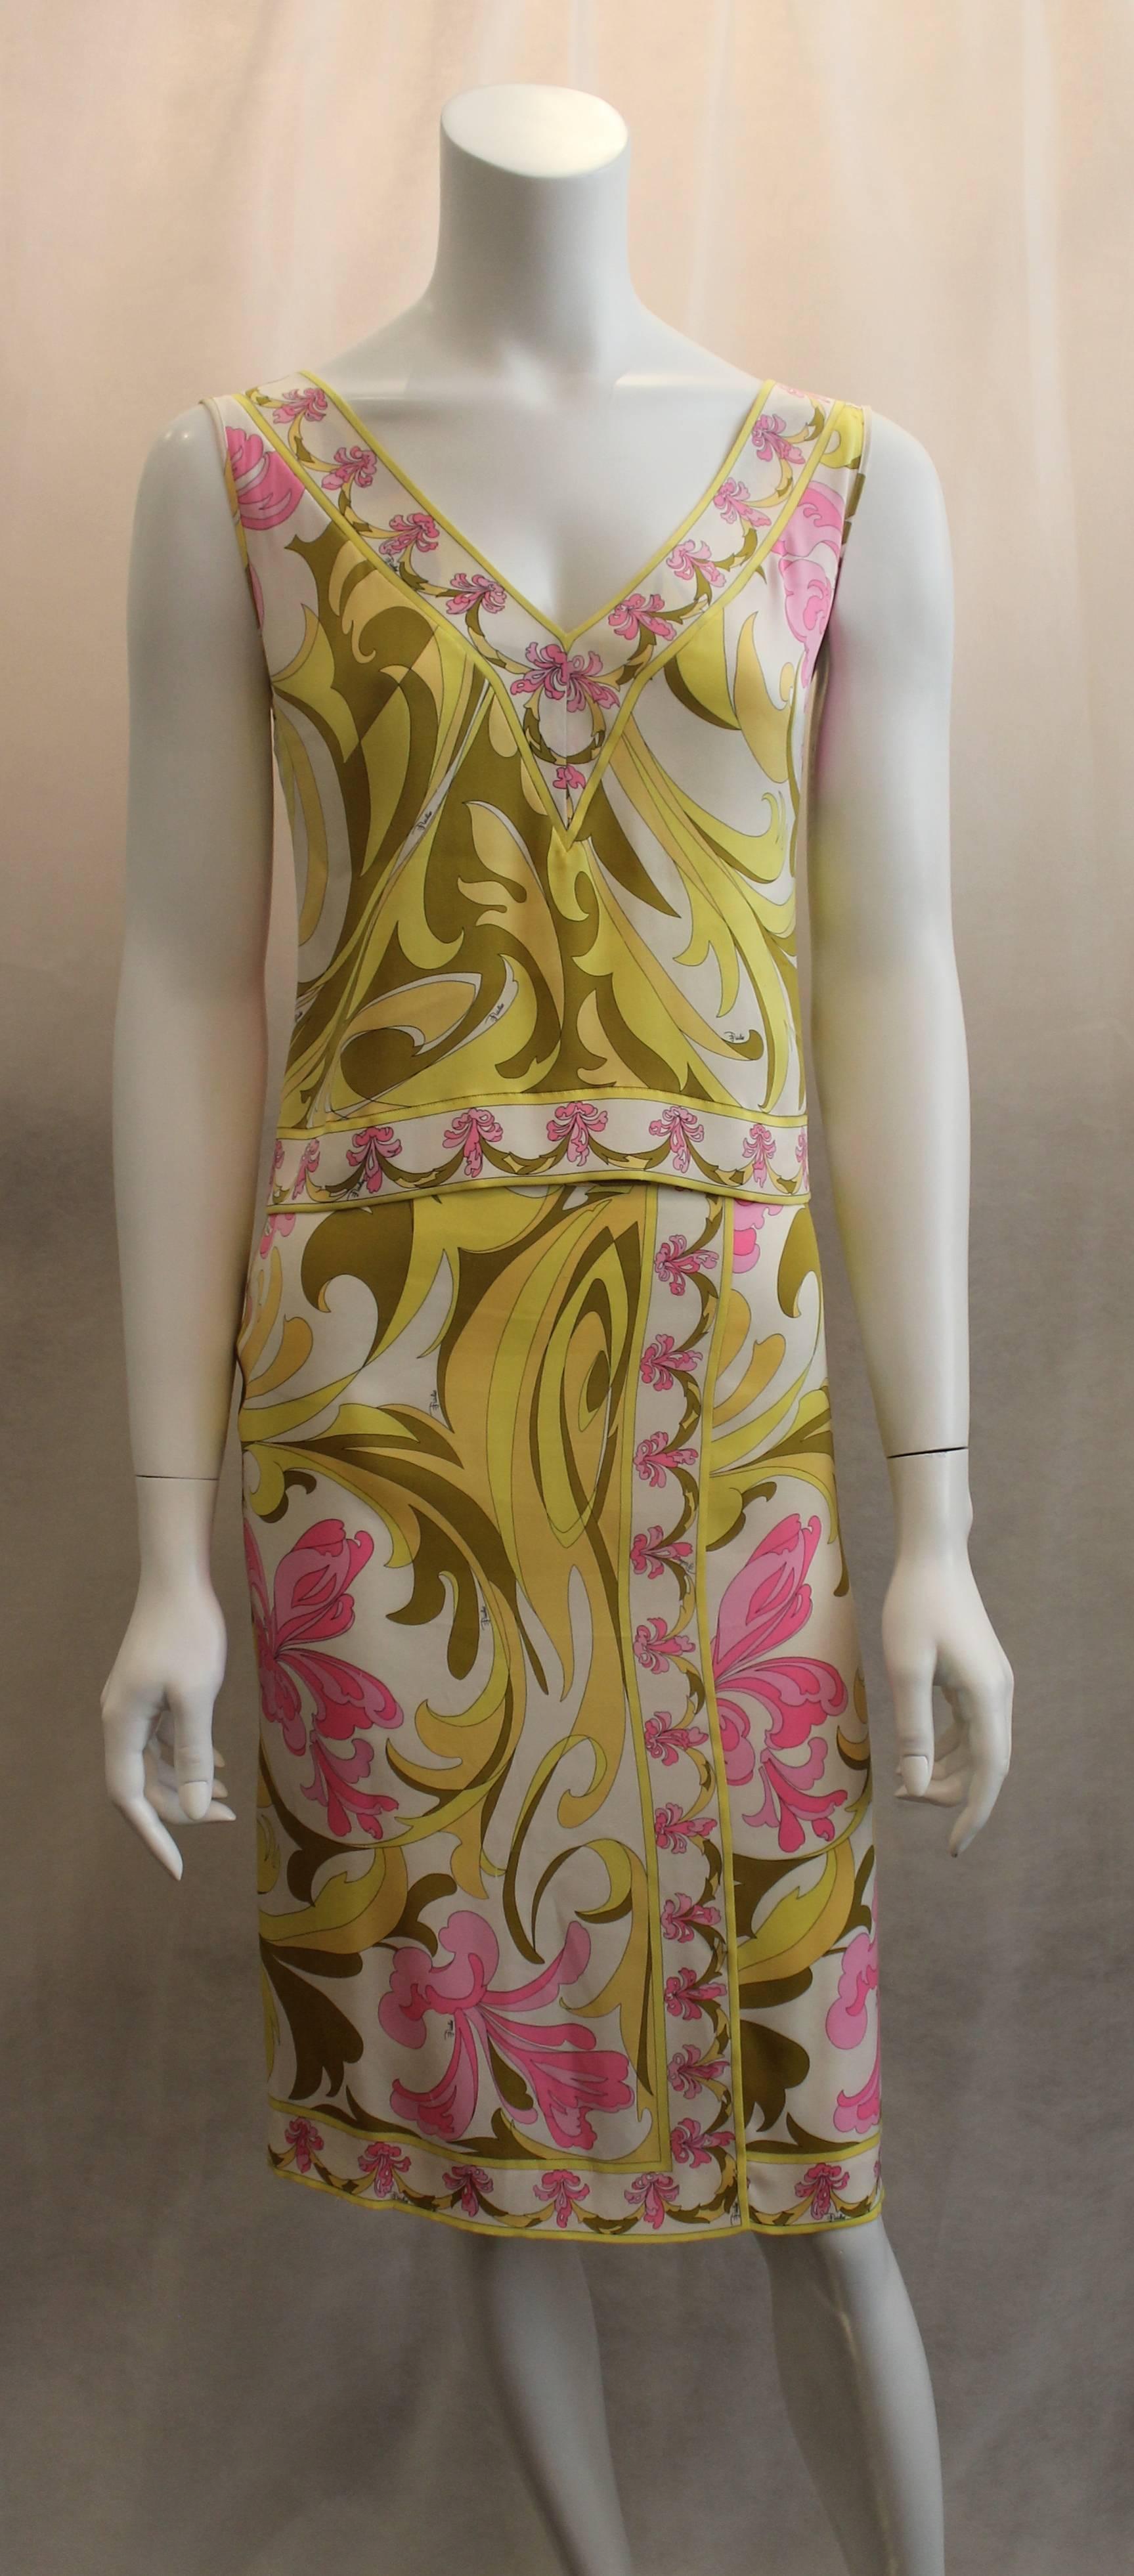 Men's Emilio Pucci Yellow, Green & Pink Printed Skirt - 4 - 1980's